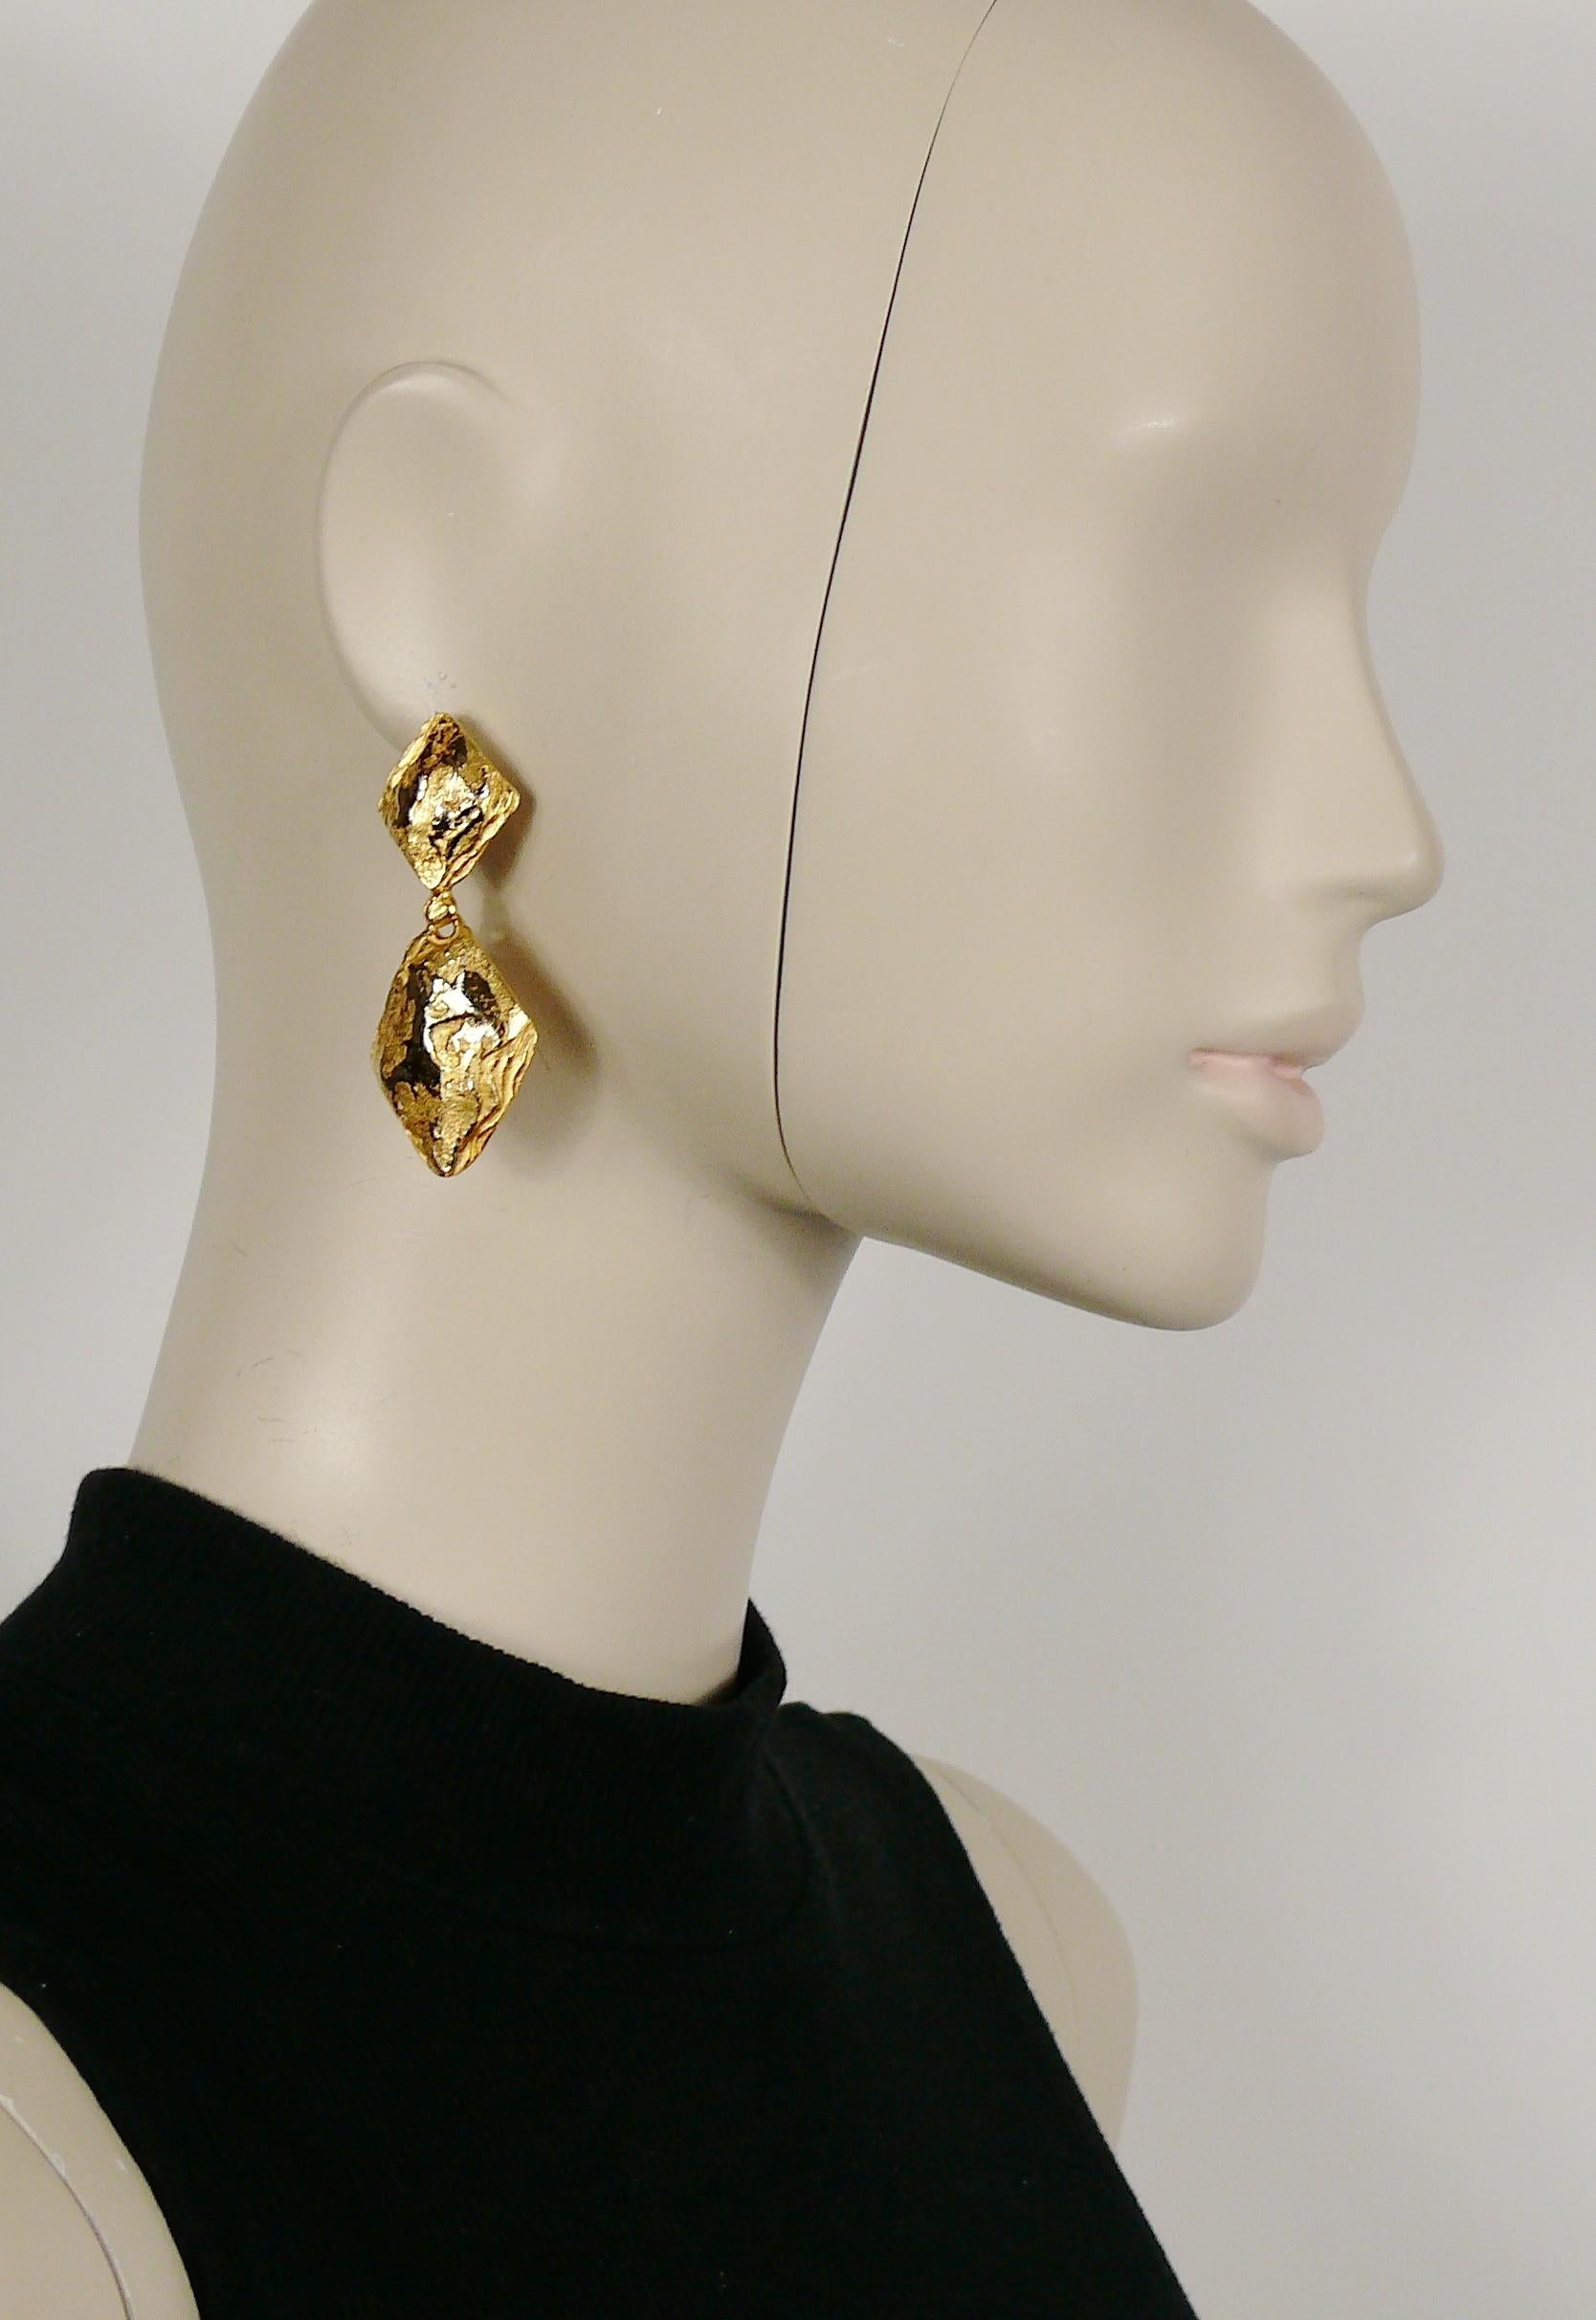 YVES SAINT LAURENT vintage distressed gold toned dangling earrings (clip-on).

Marked YSL Made in France.

Indicative measurements : height approx. 6.2 cm (2.44 inches) / max. width approx. 2.3 cm (0.91 inch).

NOTES
- This is a preloved vintage